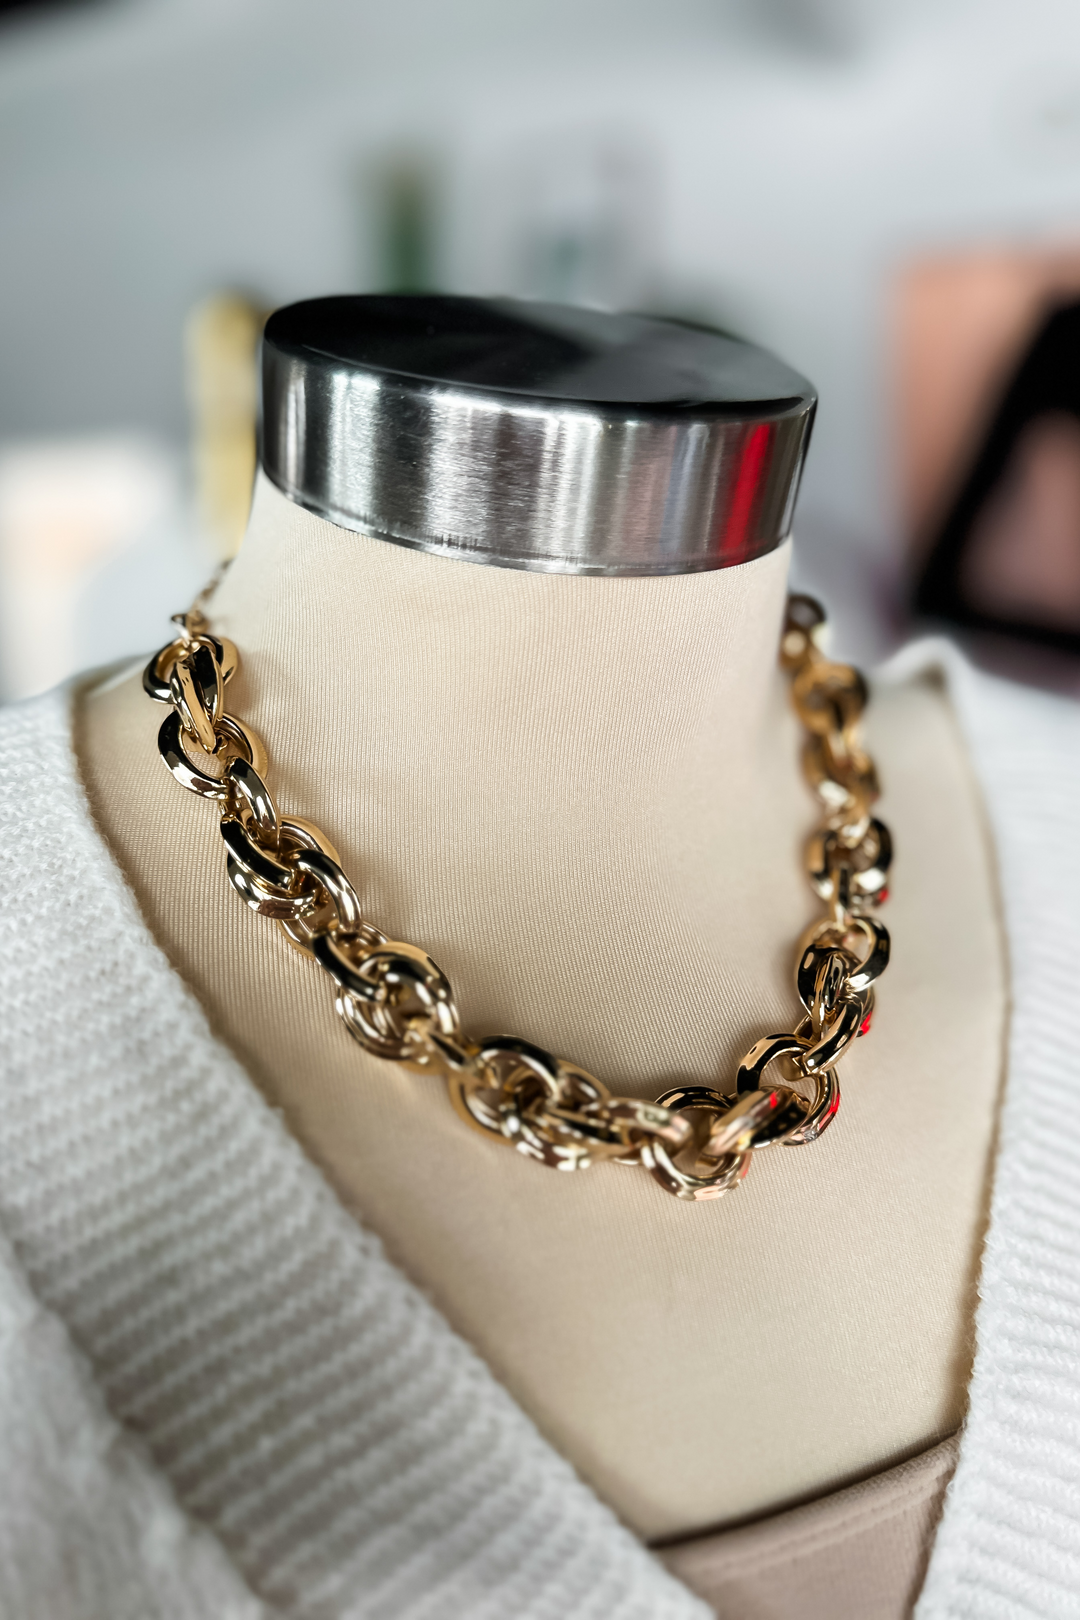 The Chunky Statement Necklace